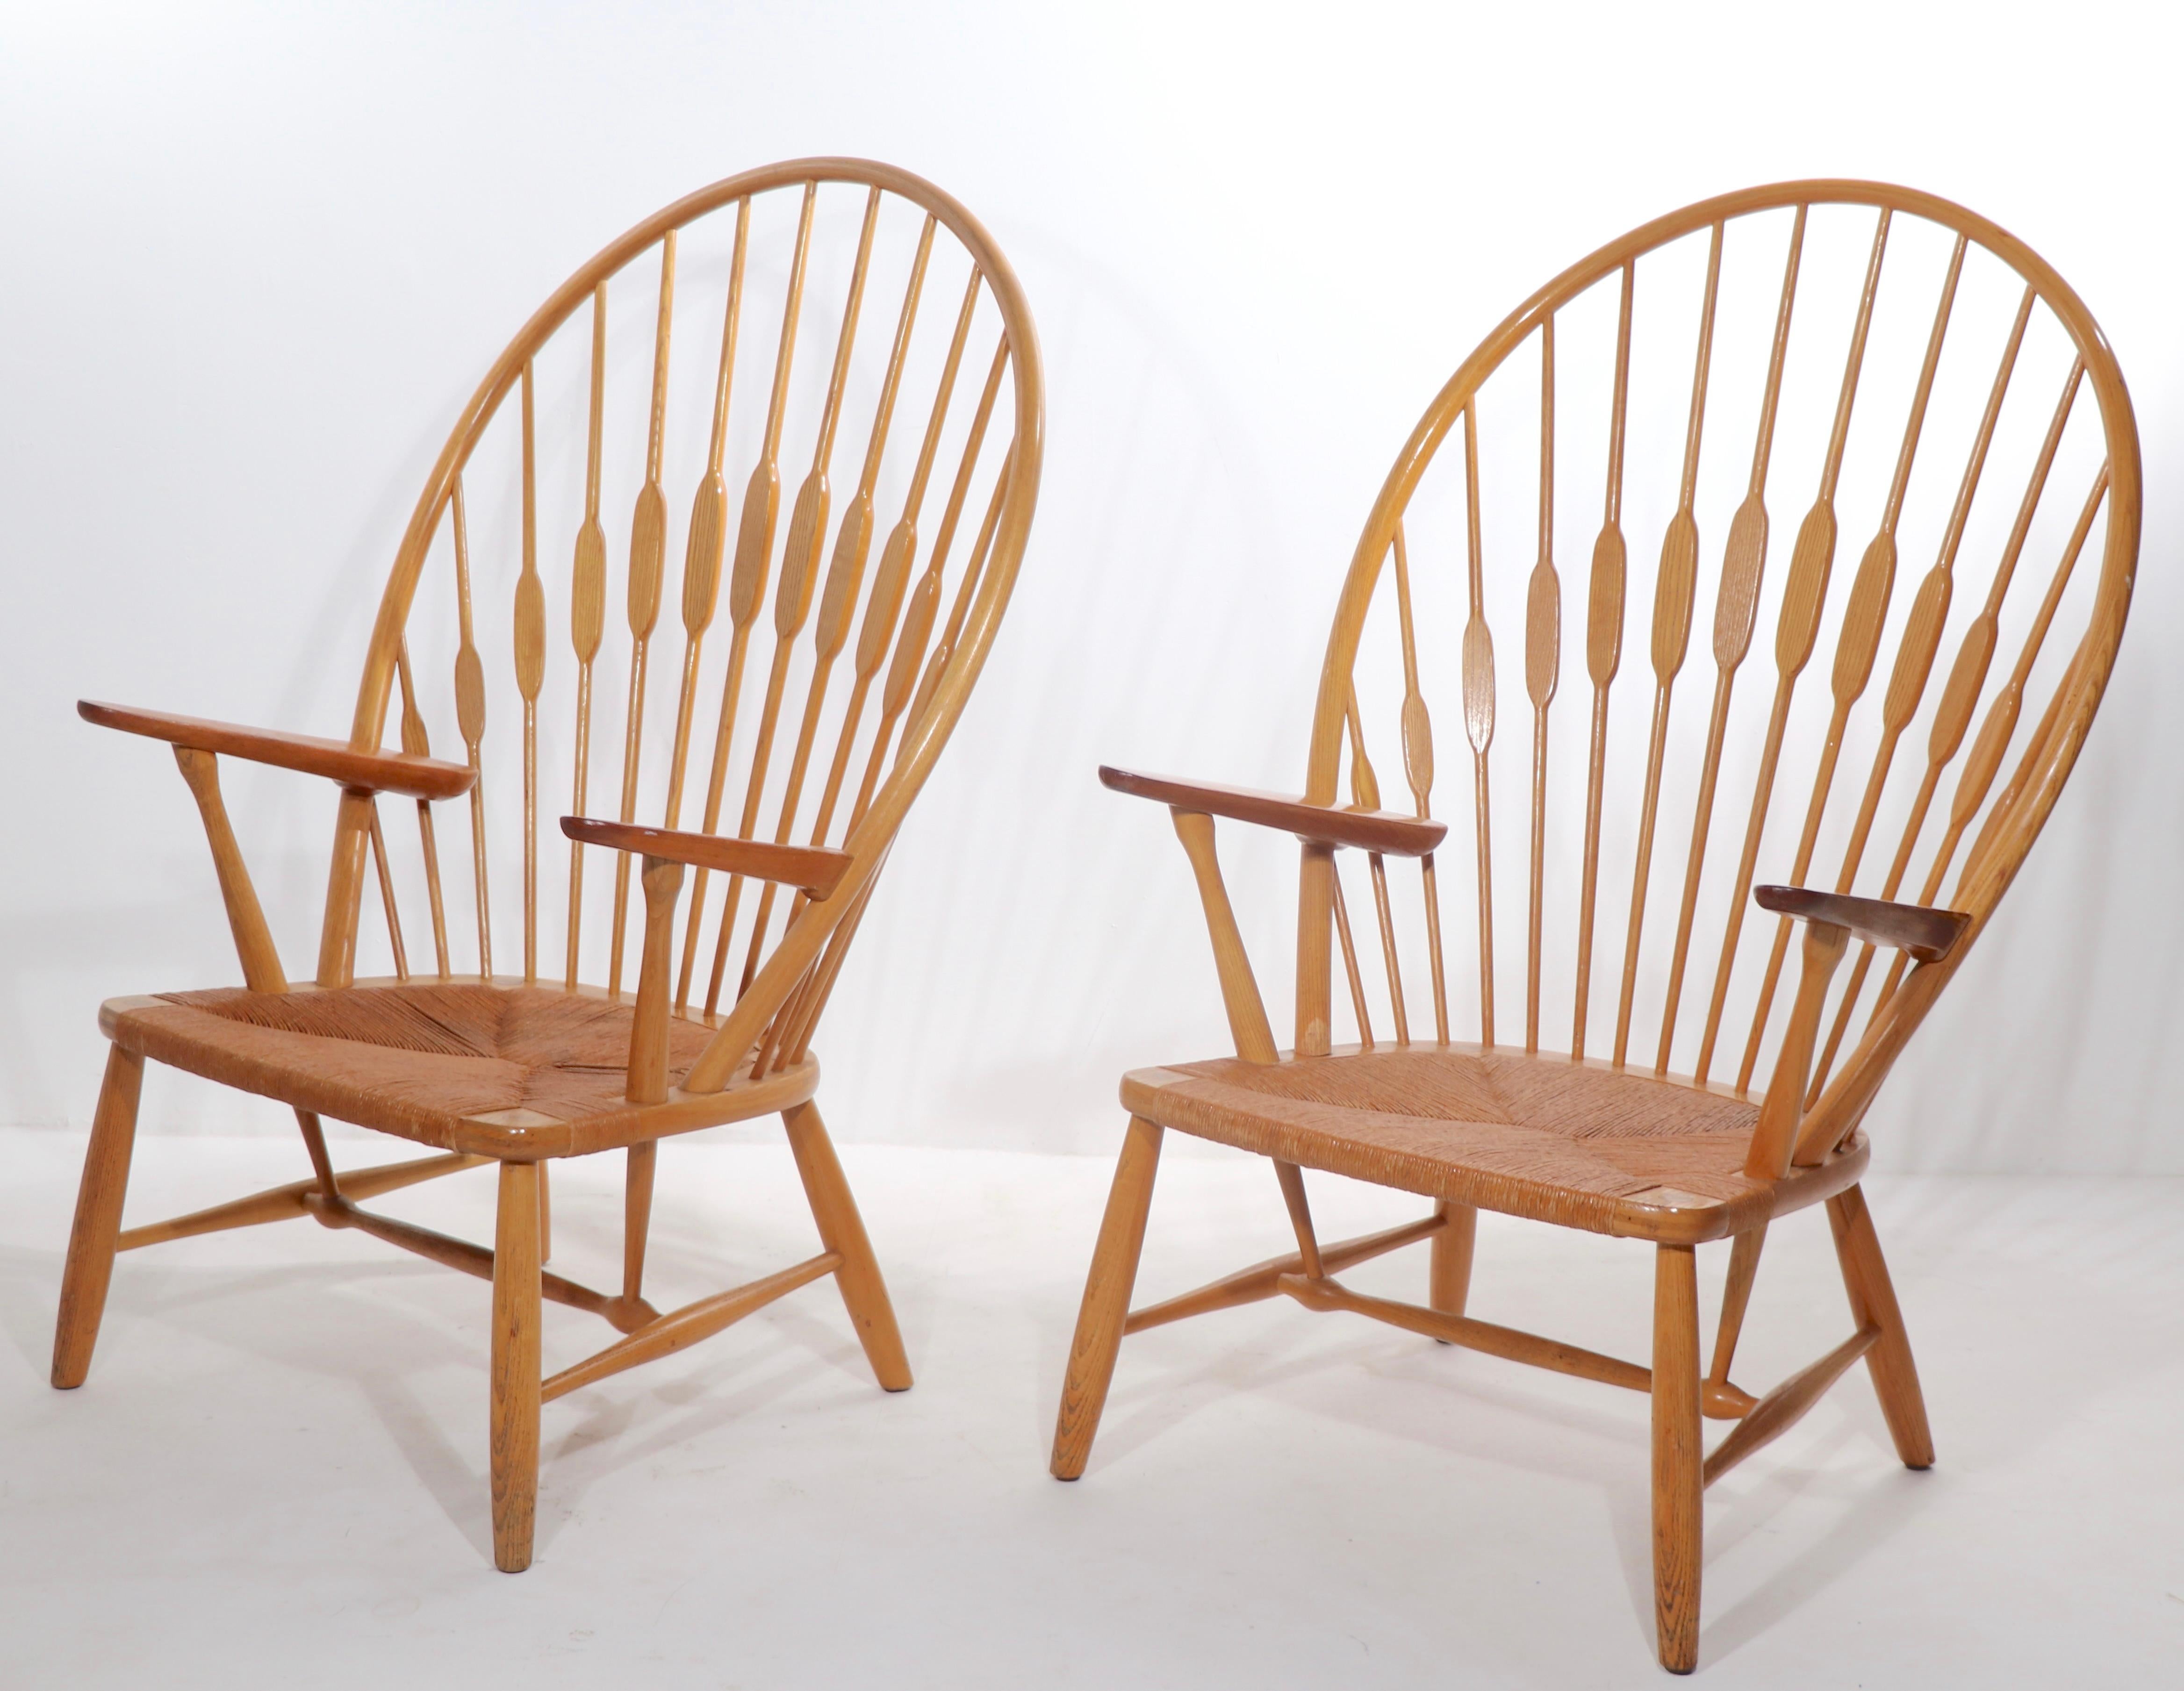 Iconic pair of Danish Modern masterpieces, Peacock Chairs, designed by Has Wegner made by Johannes Hansen, Copenhagen Denmark, circa 1960's. Constructed of Ash, and Teak, with original papercoard seats. Both chairs are in clean, ready to use